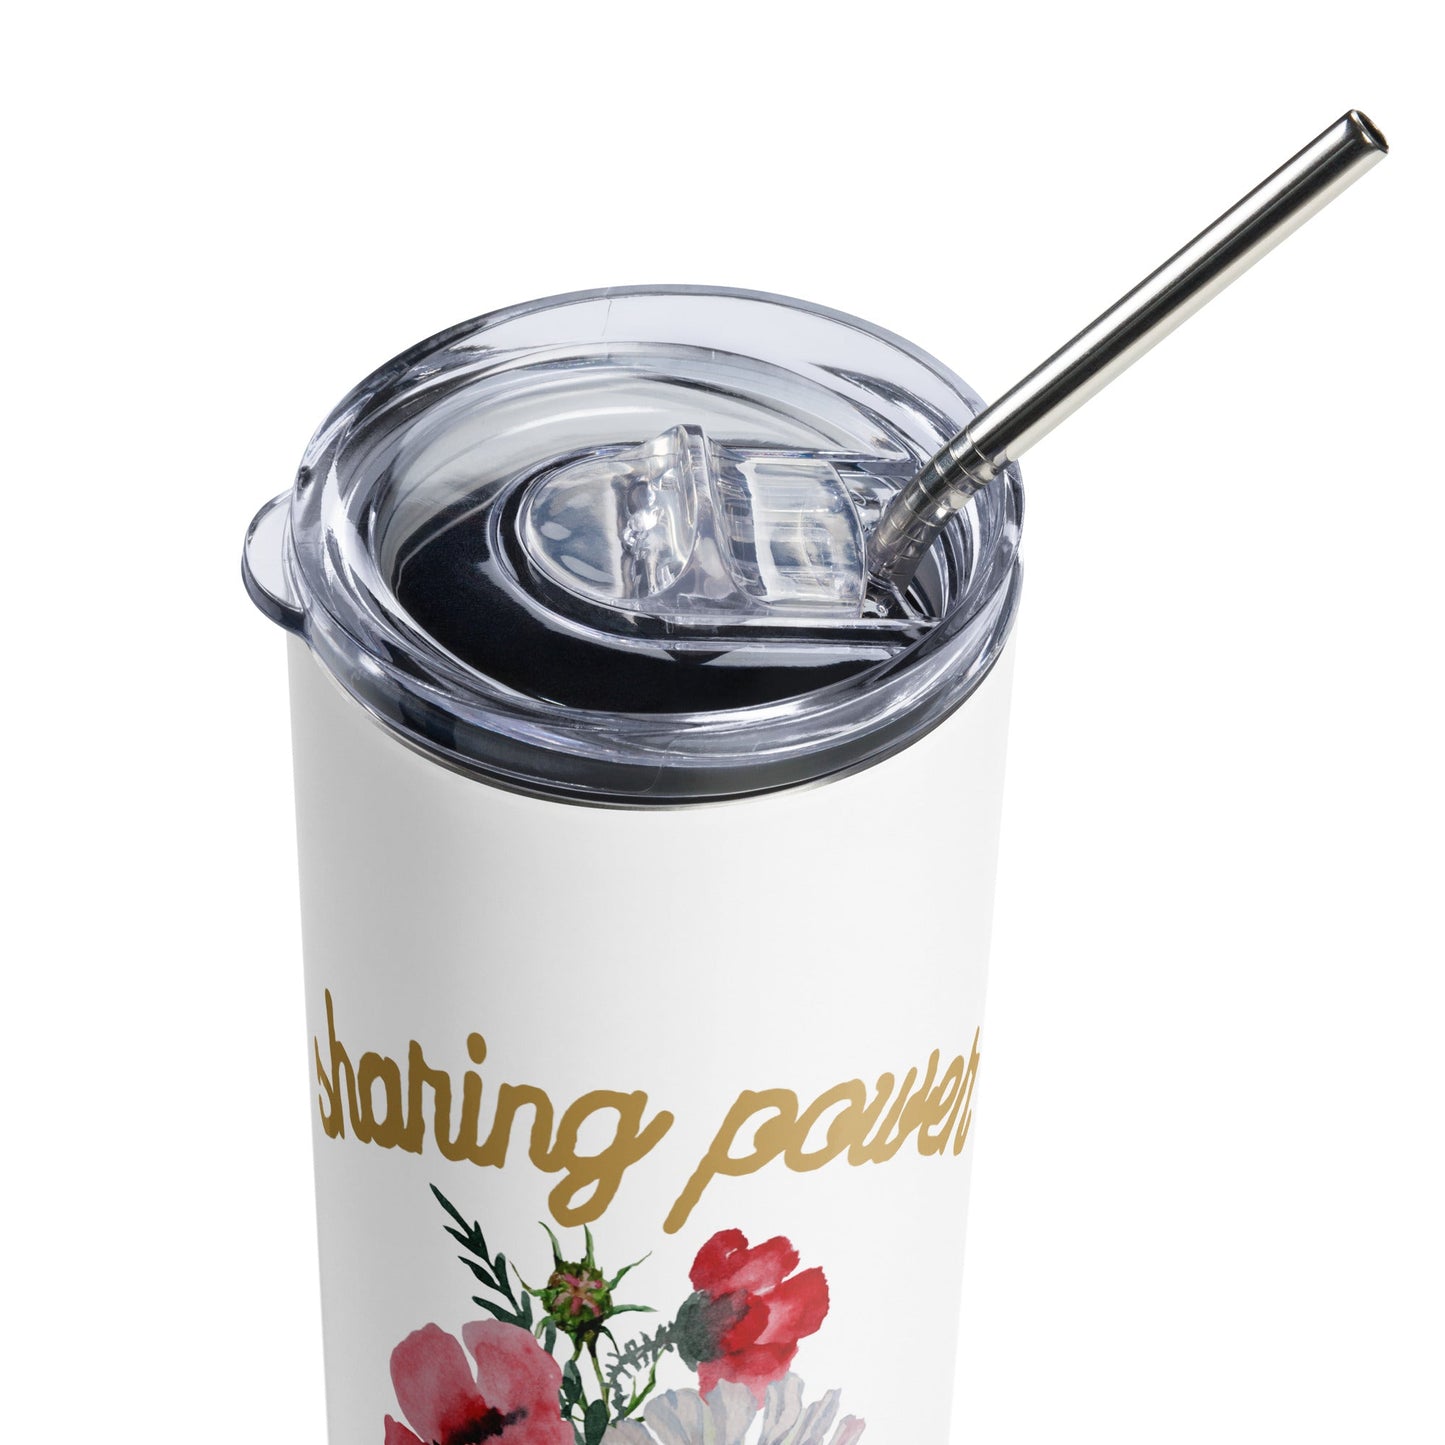 Sharing Power is Caring Floral Stainless steel tumbler-recalciGrant